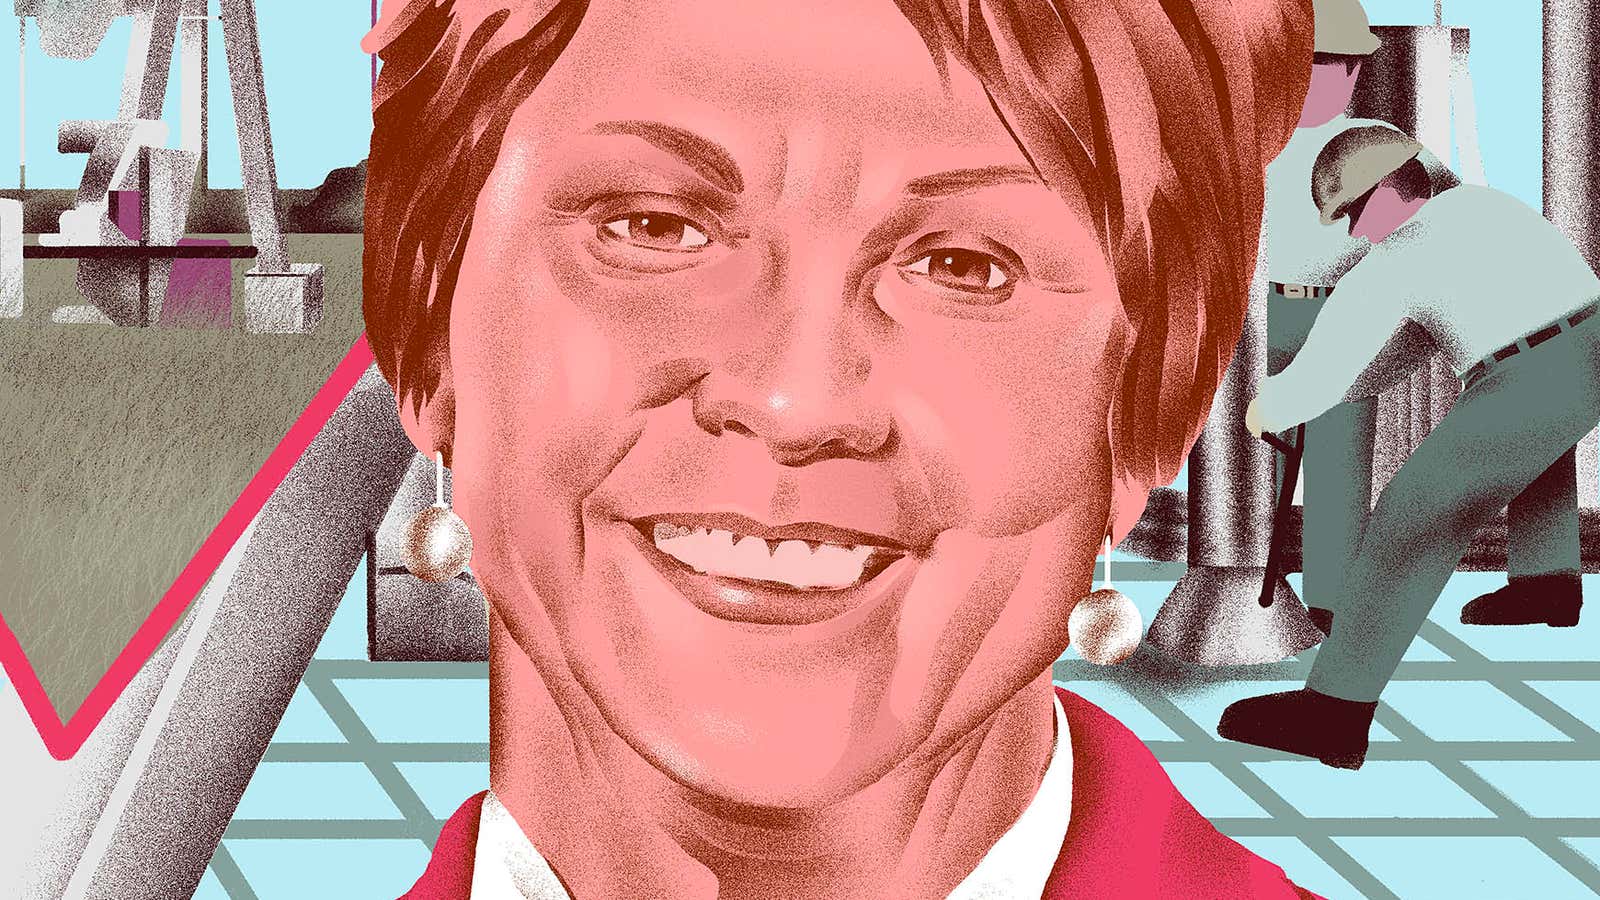 Vicki Hollub is showing Big Oil how to survive climate change